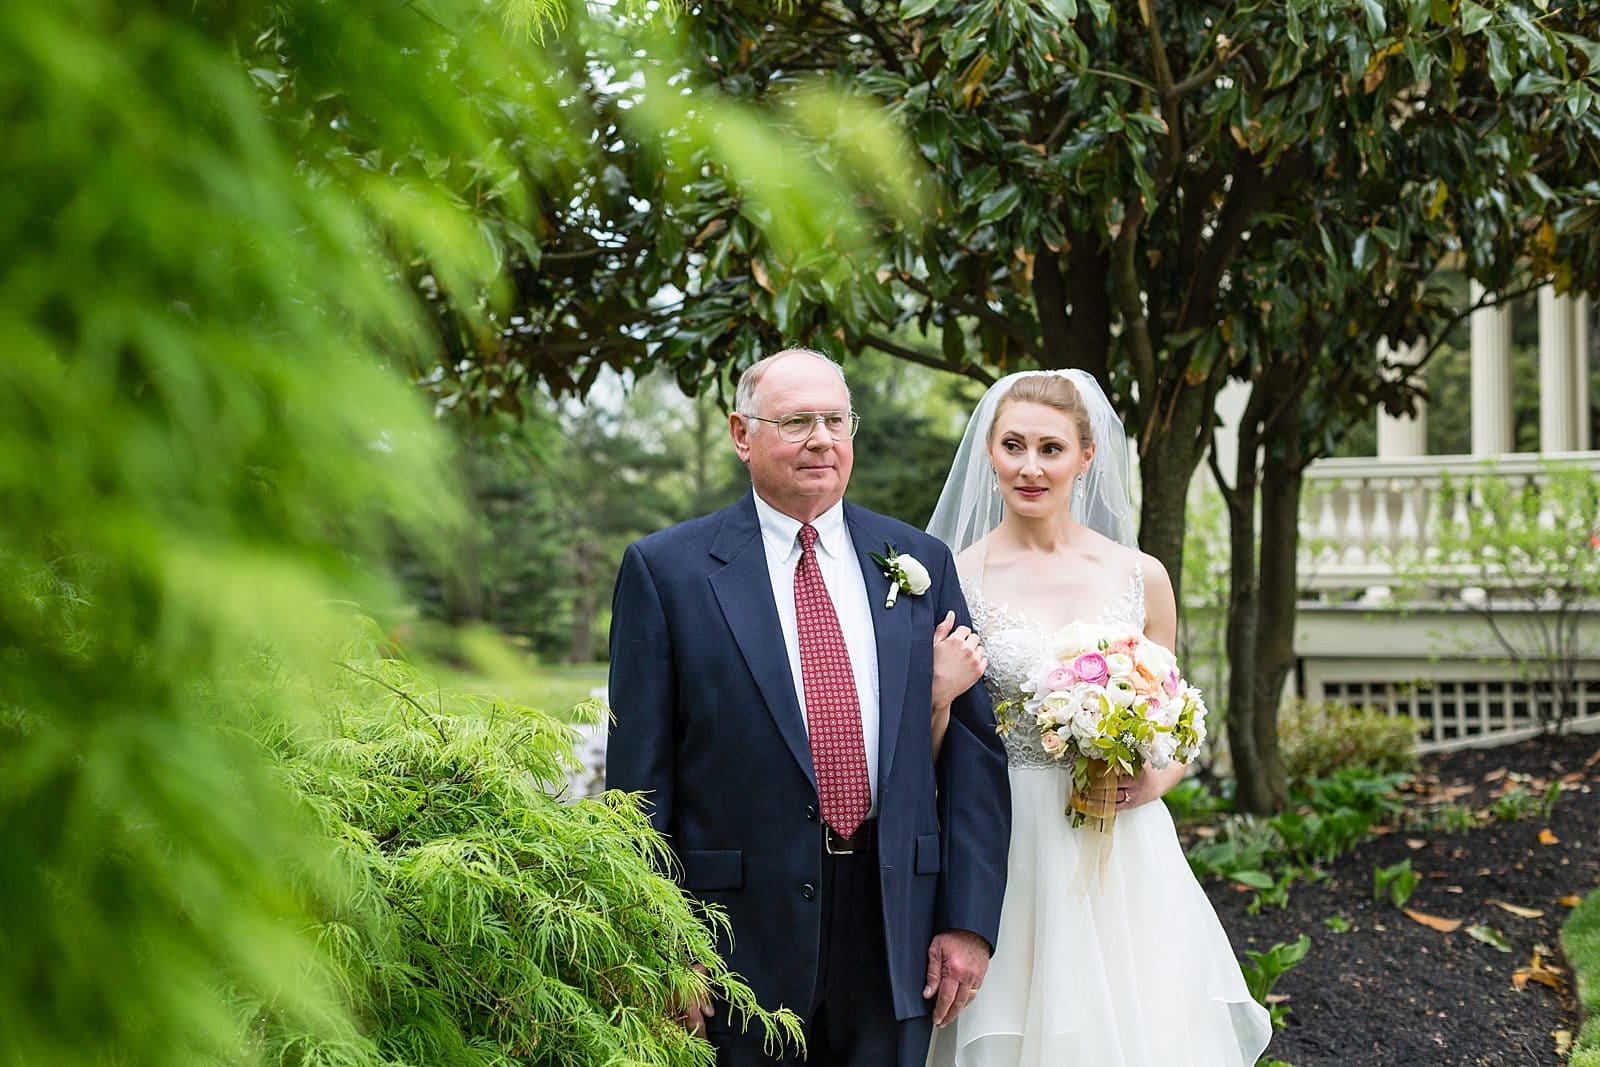 Bride and her father about to walk down the aisle, Glen Foerd Mansion wedding